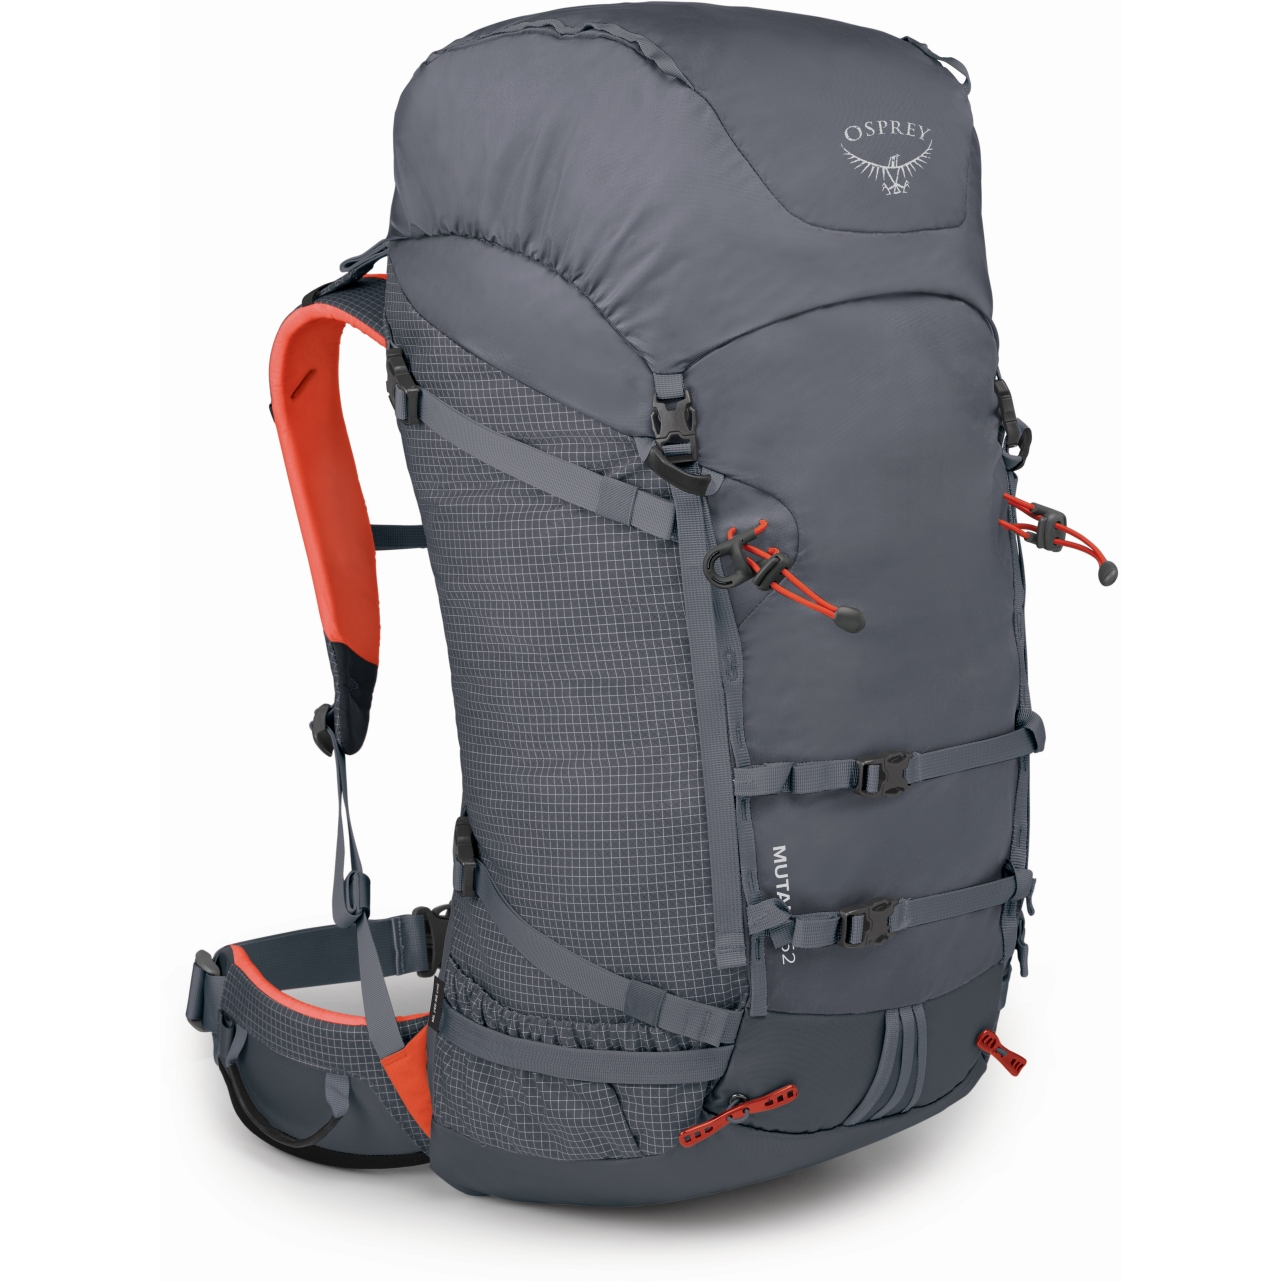 Image of Osprey Mutant 52 Backpack - Tungsten Grey - S/M